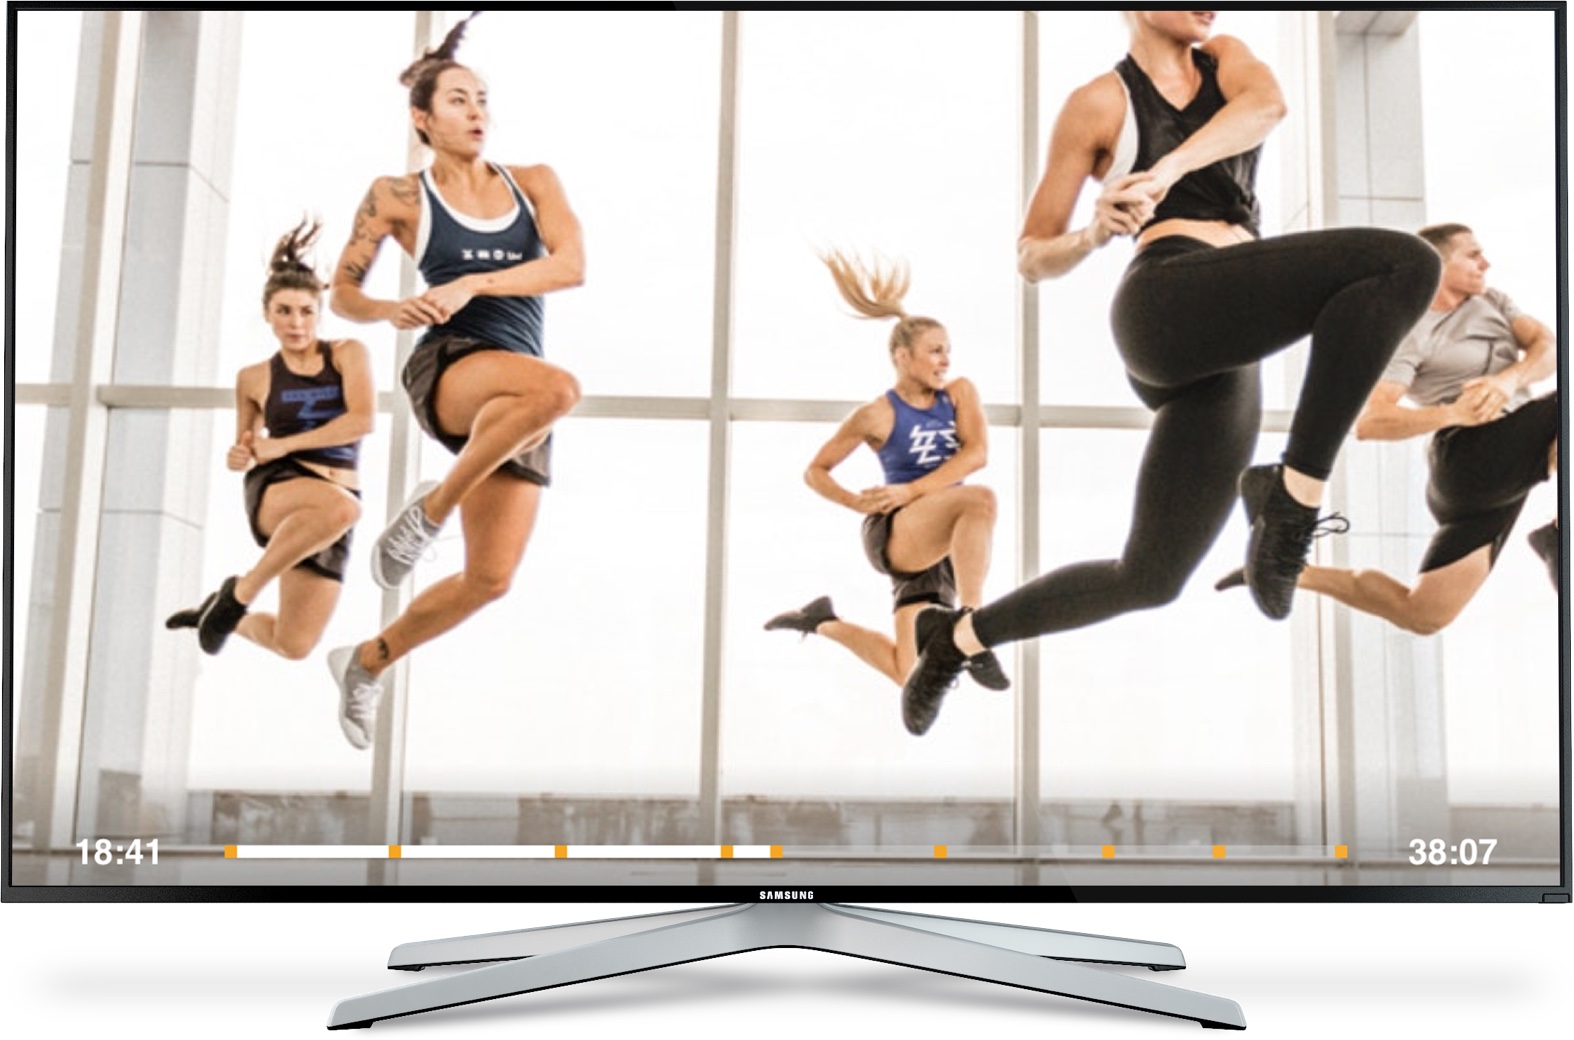 Image of Les Mills On Demand streaming video workout. 4 athletes exercising.